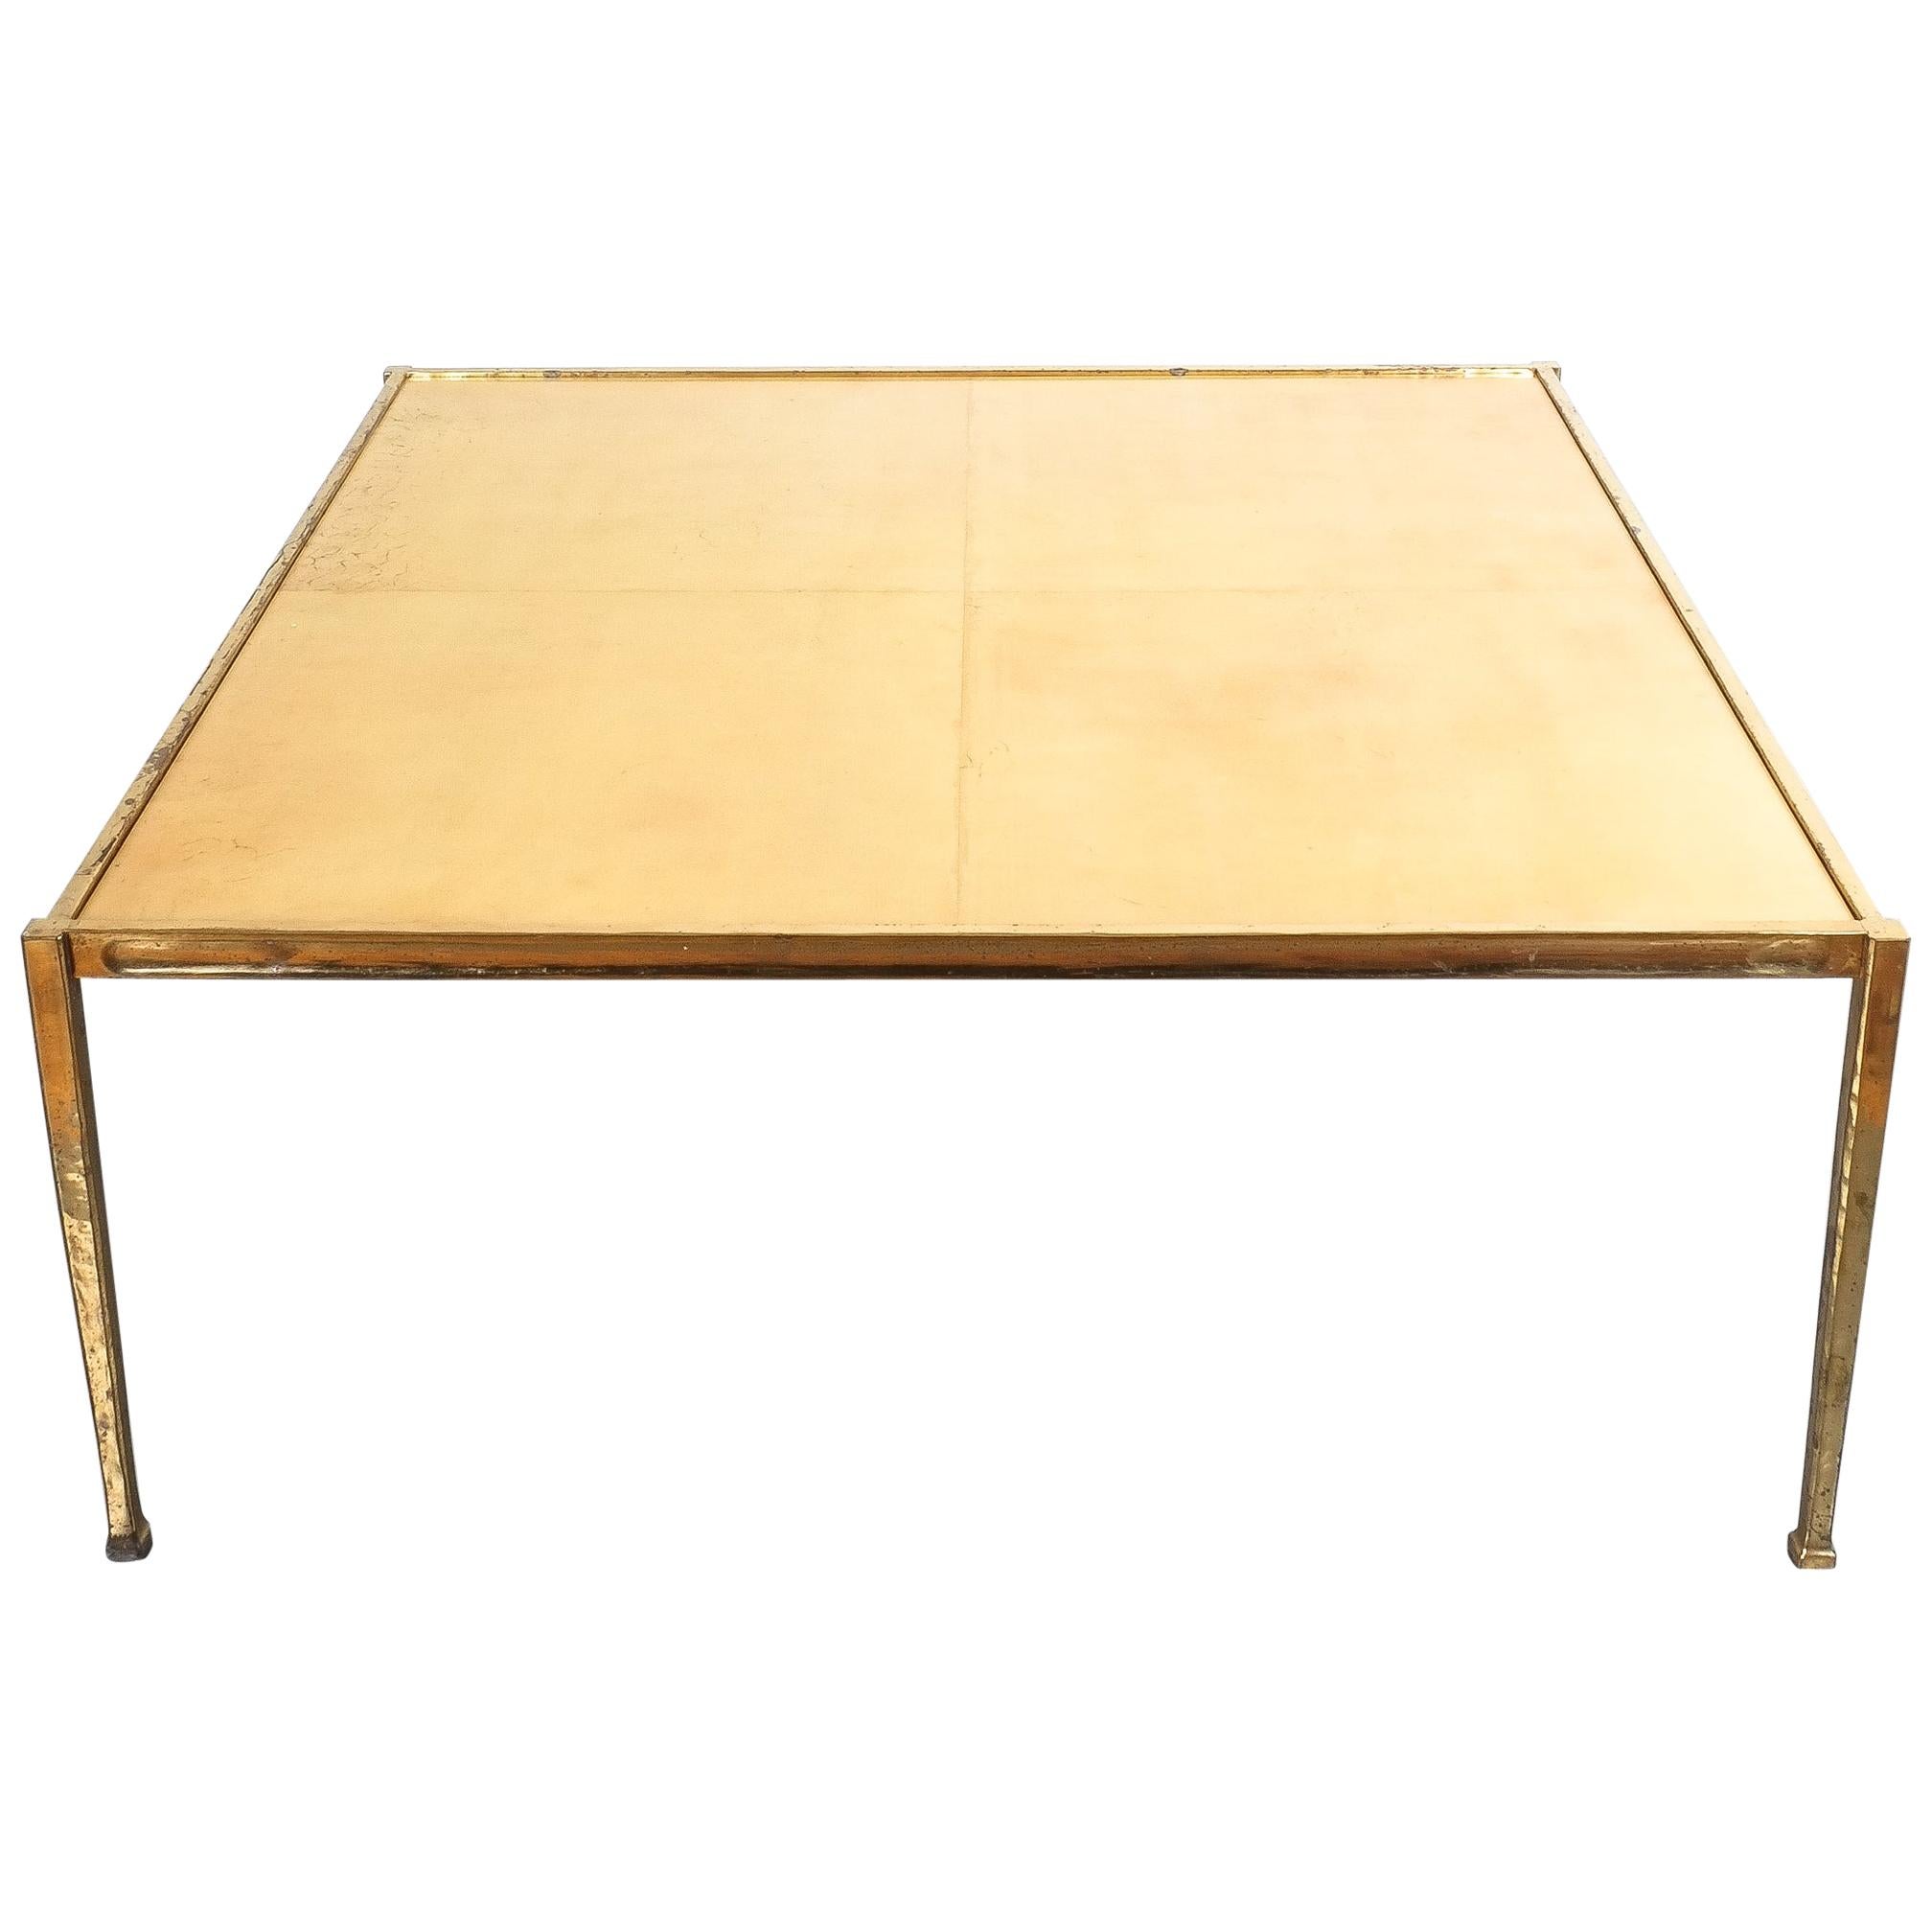 Square Solid Brass Parchment Coffee Table, France, 1965 For Sale